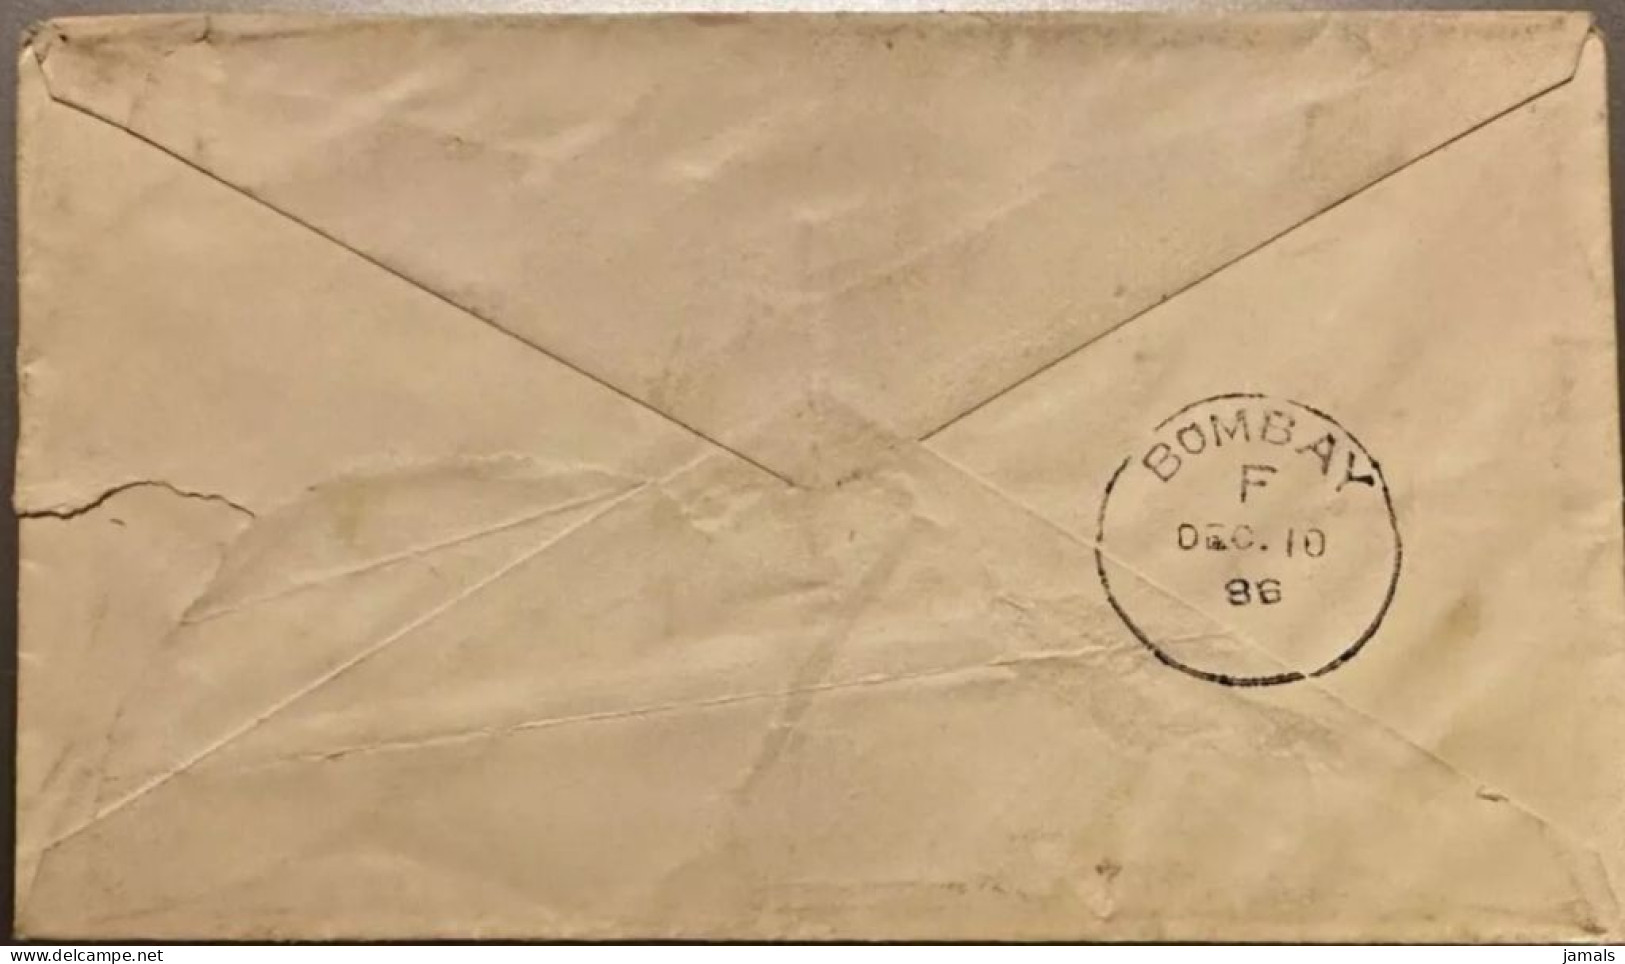 Br India Queen Victoria Postal Stationary Envelope, Madras Postmark As Scan - 1882-1901 Imperio